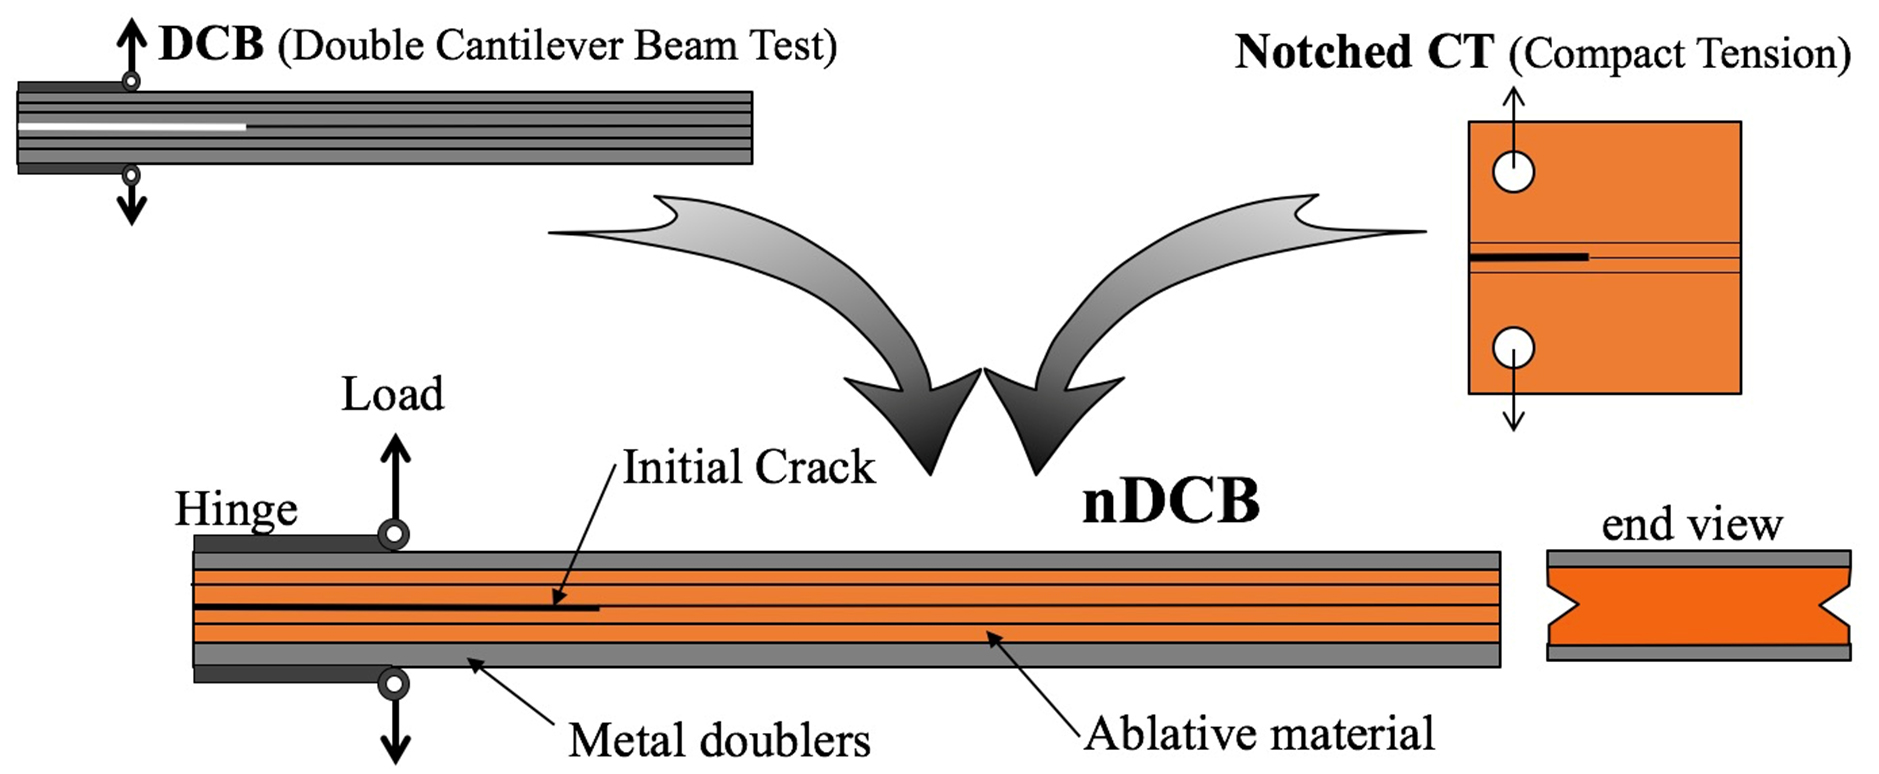 Combining the DCB and notched compact tension tests into the new notched nDBC test.